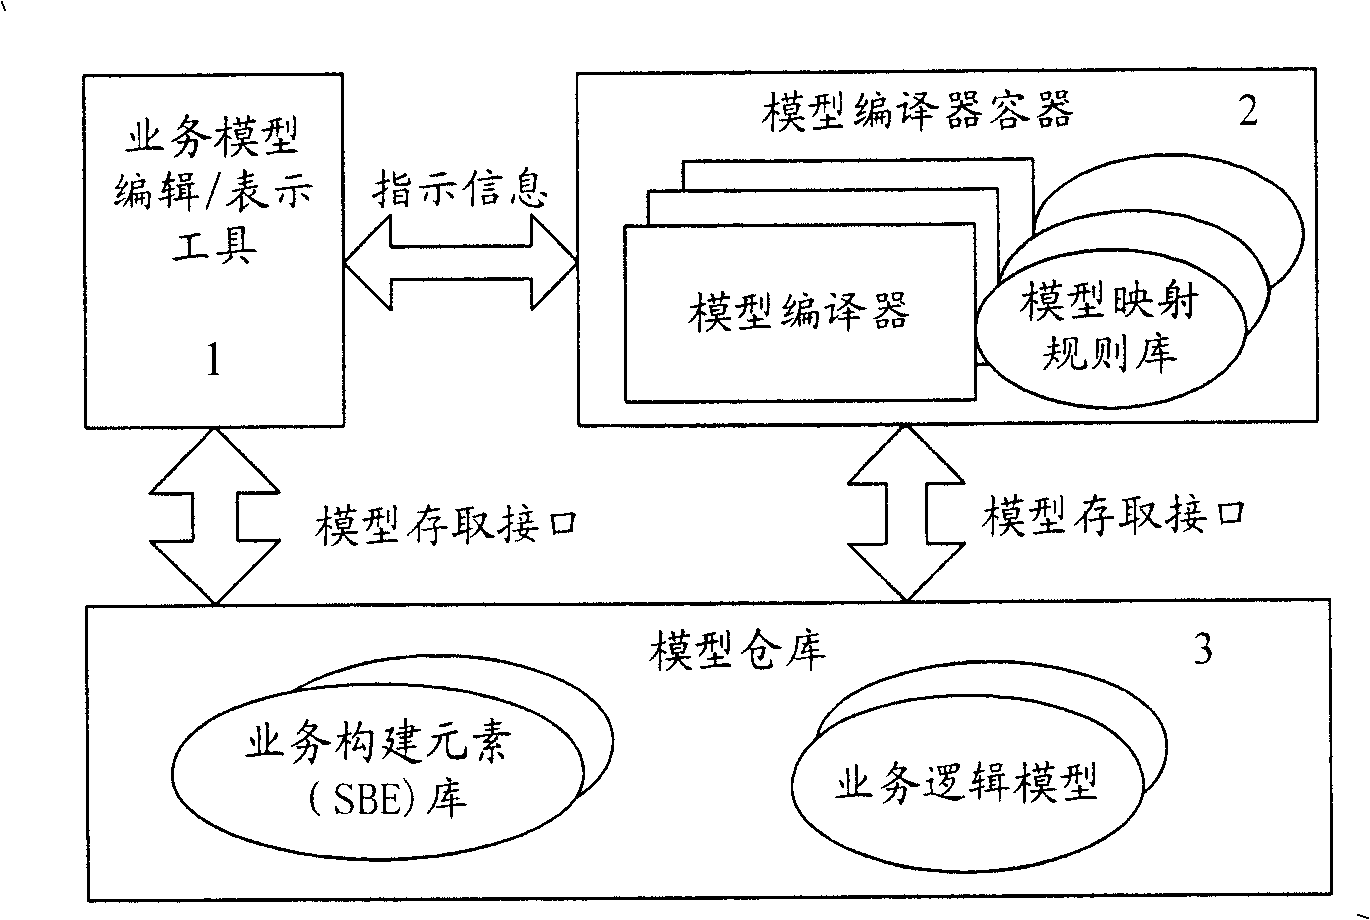 Model driven fused business generating method adapt to different interfaces and platform technique